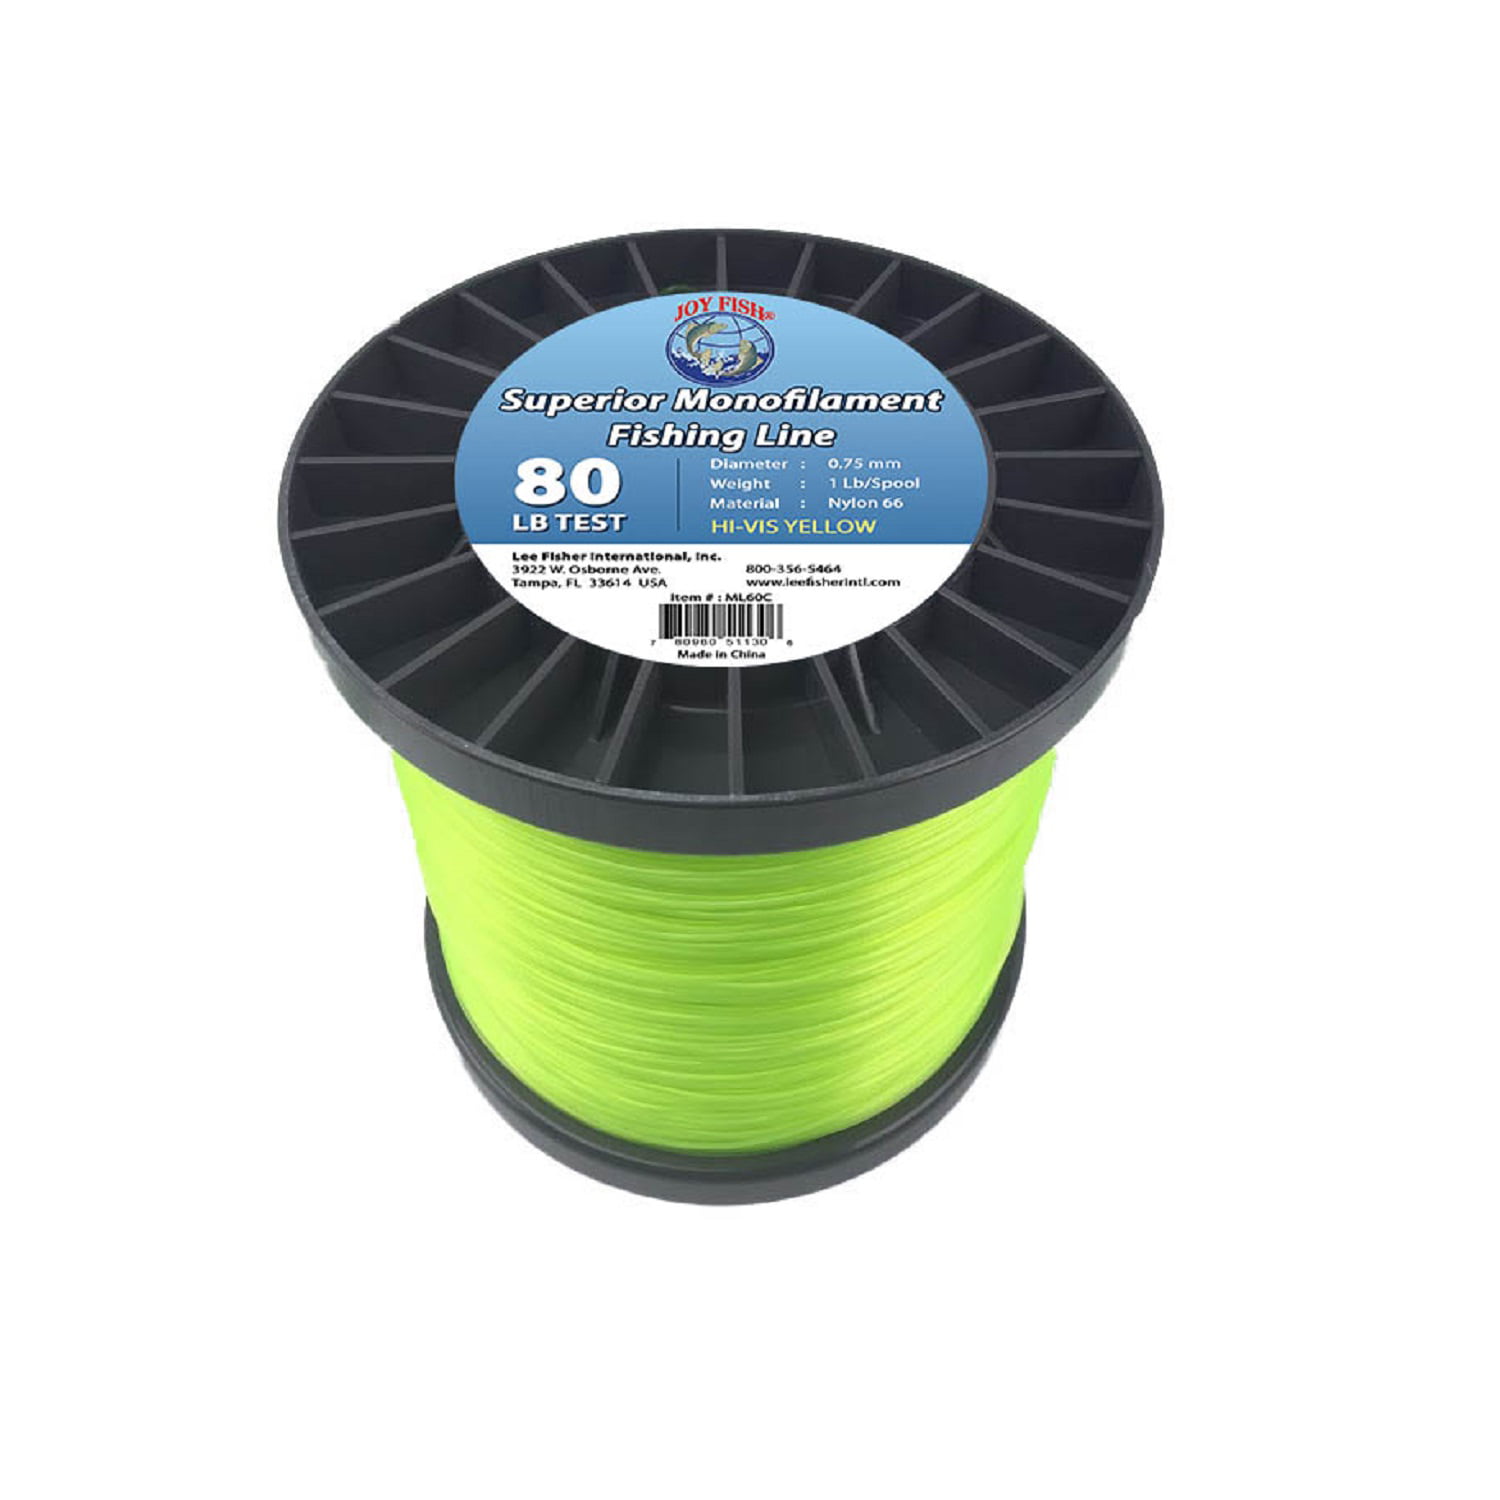 New in package 15 LBS Test x 840 YD Cortland CMC-ST8 Monofilament Fishing Line 